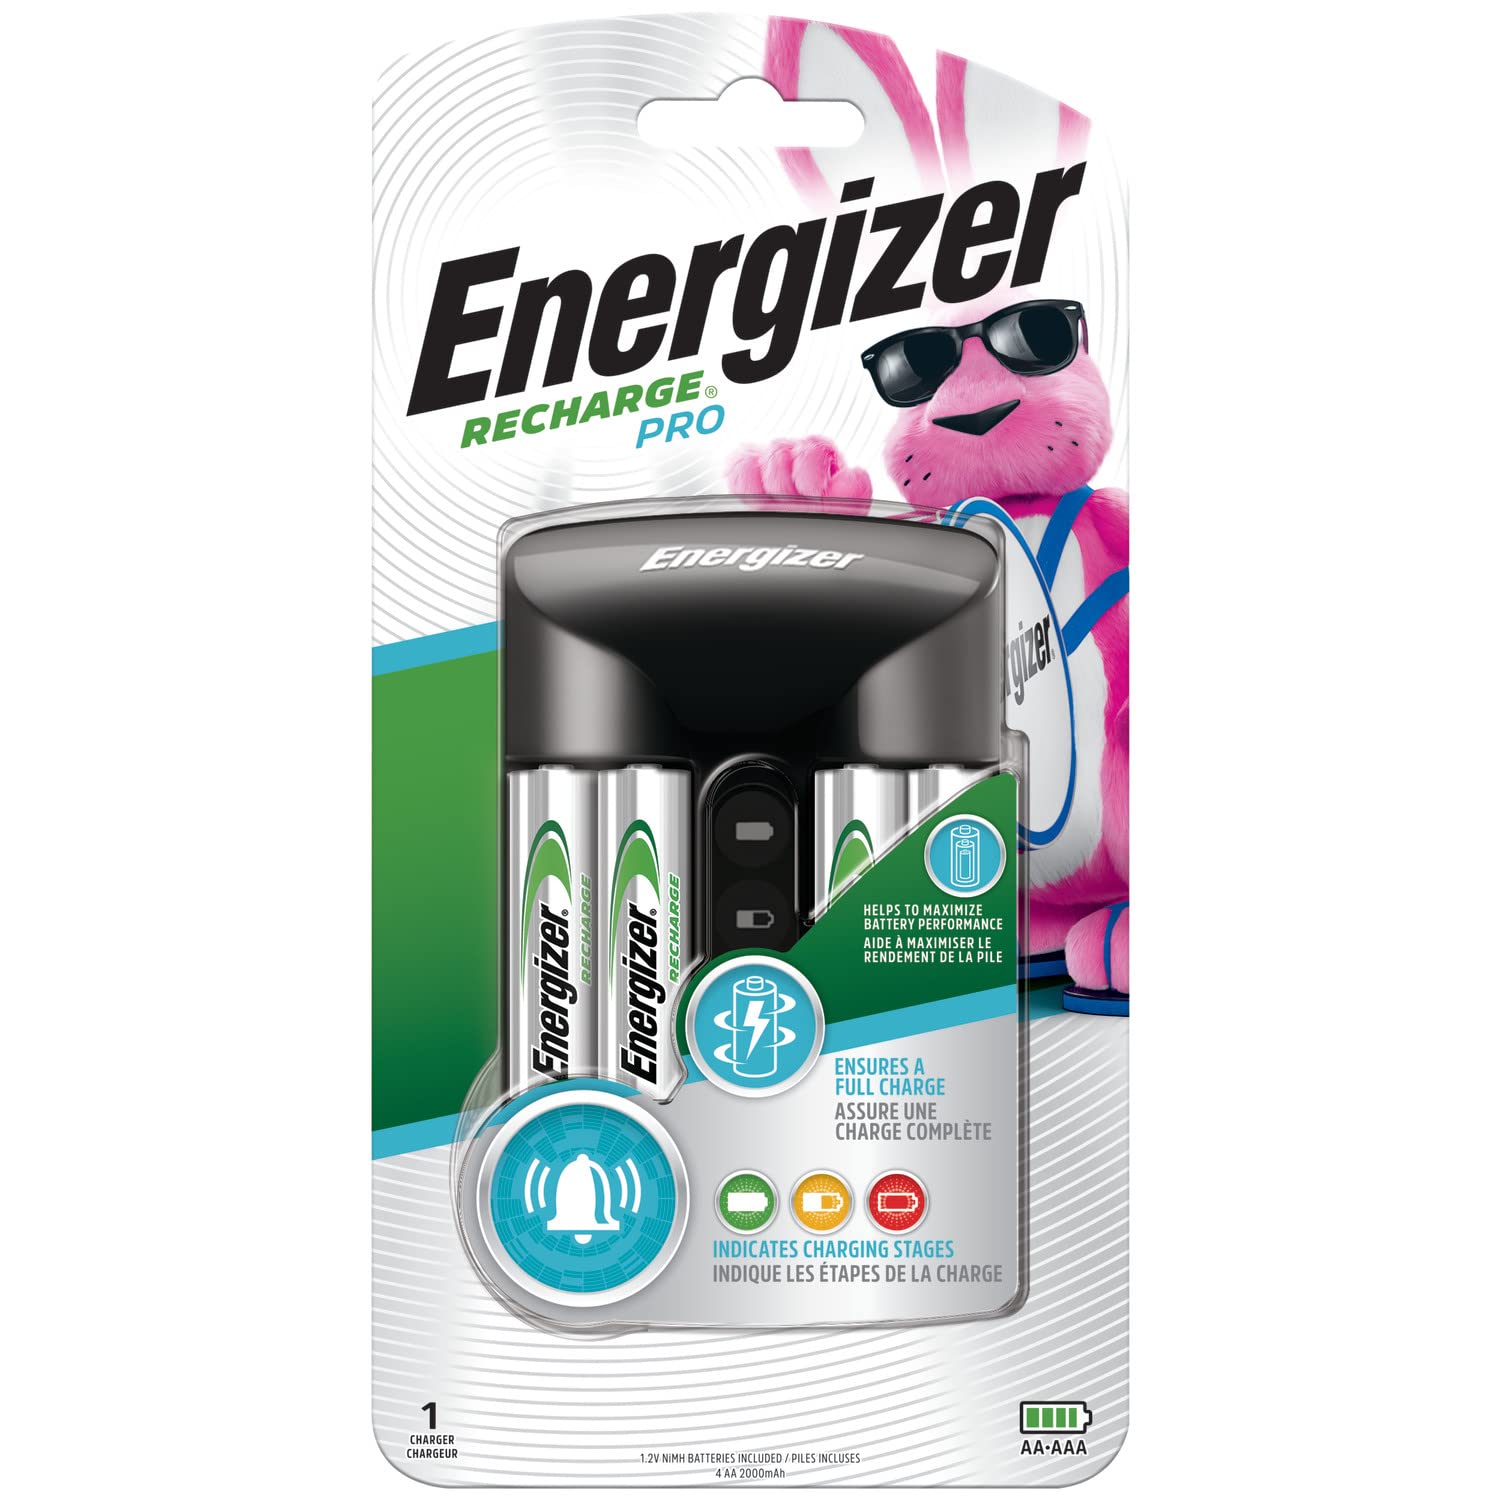 Energizer Rechargeable AA and AAA Battery Charger (Recharge Pro) with 4 AA NiMH Rechargeable Batteries, Auto-Safety Feature, Over-Charge Protection